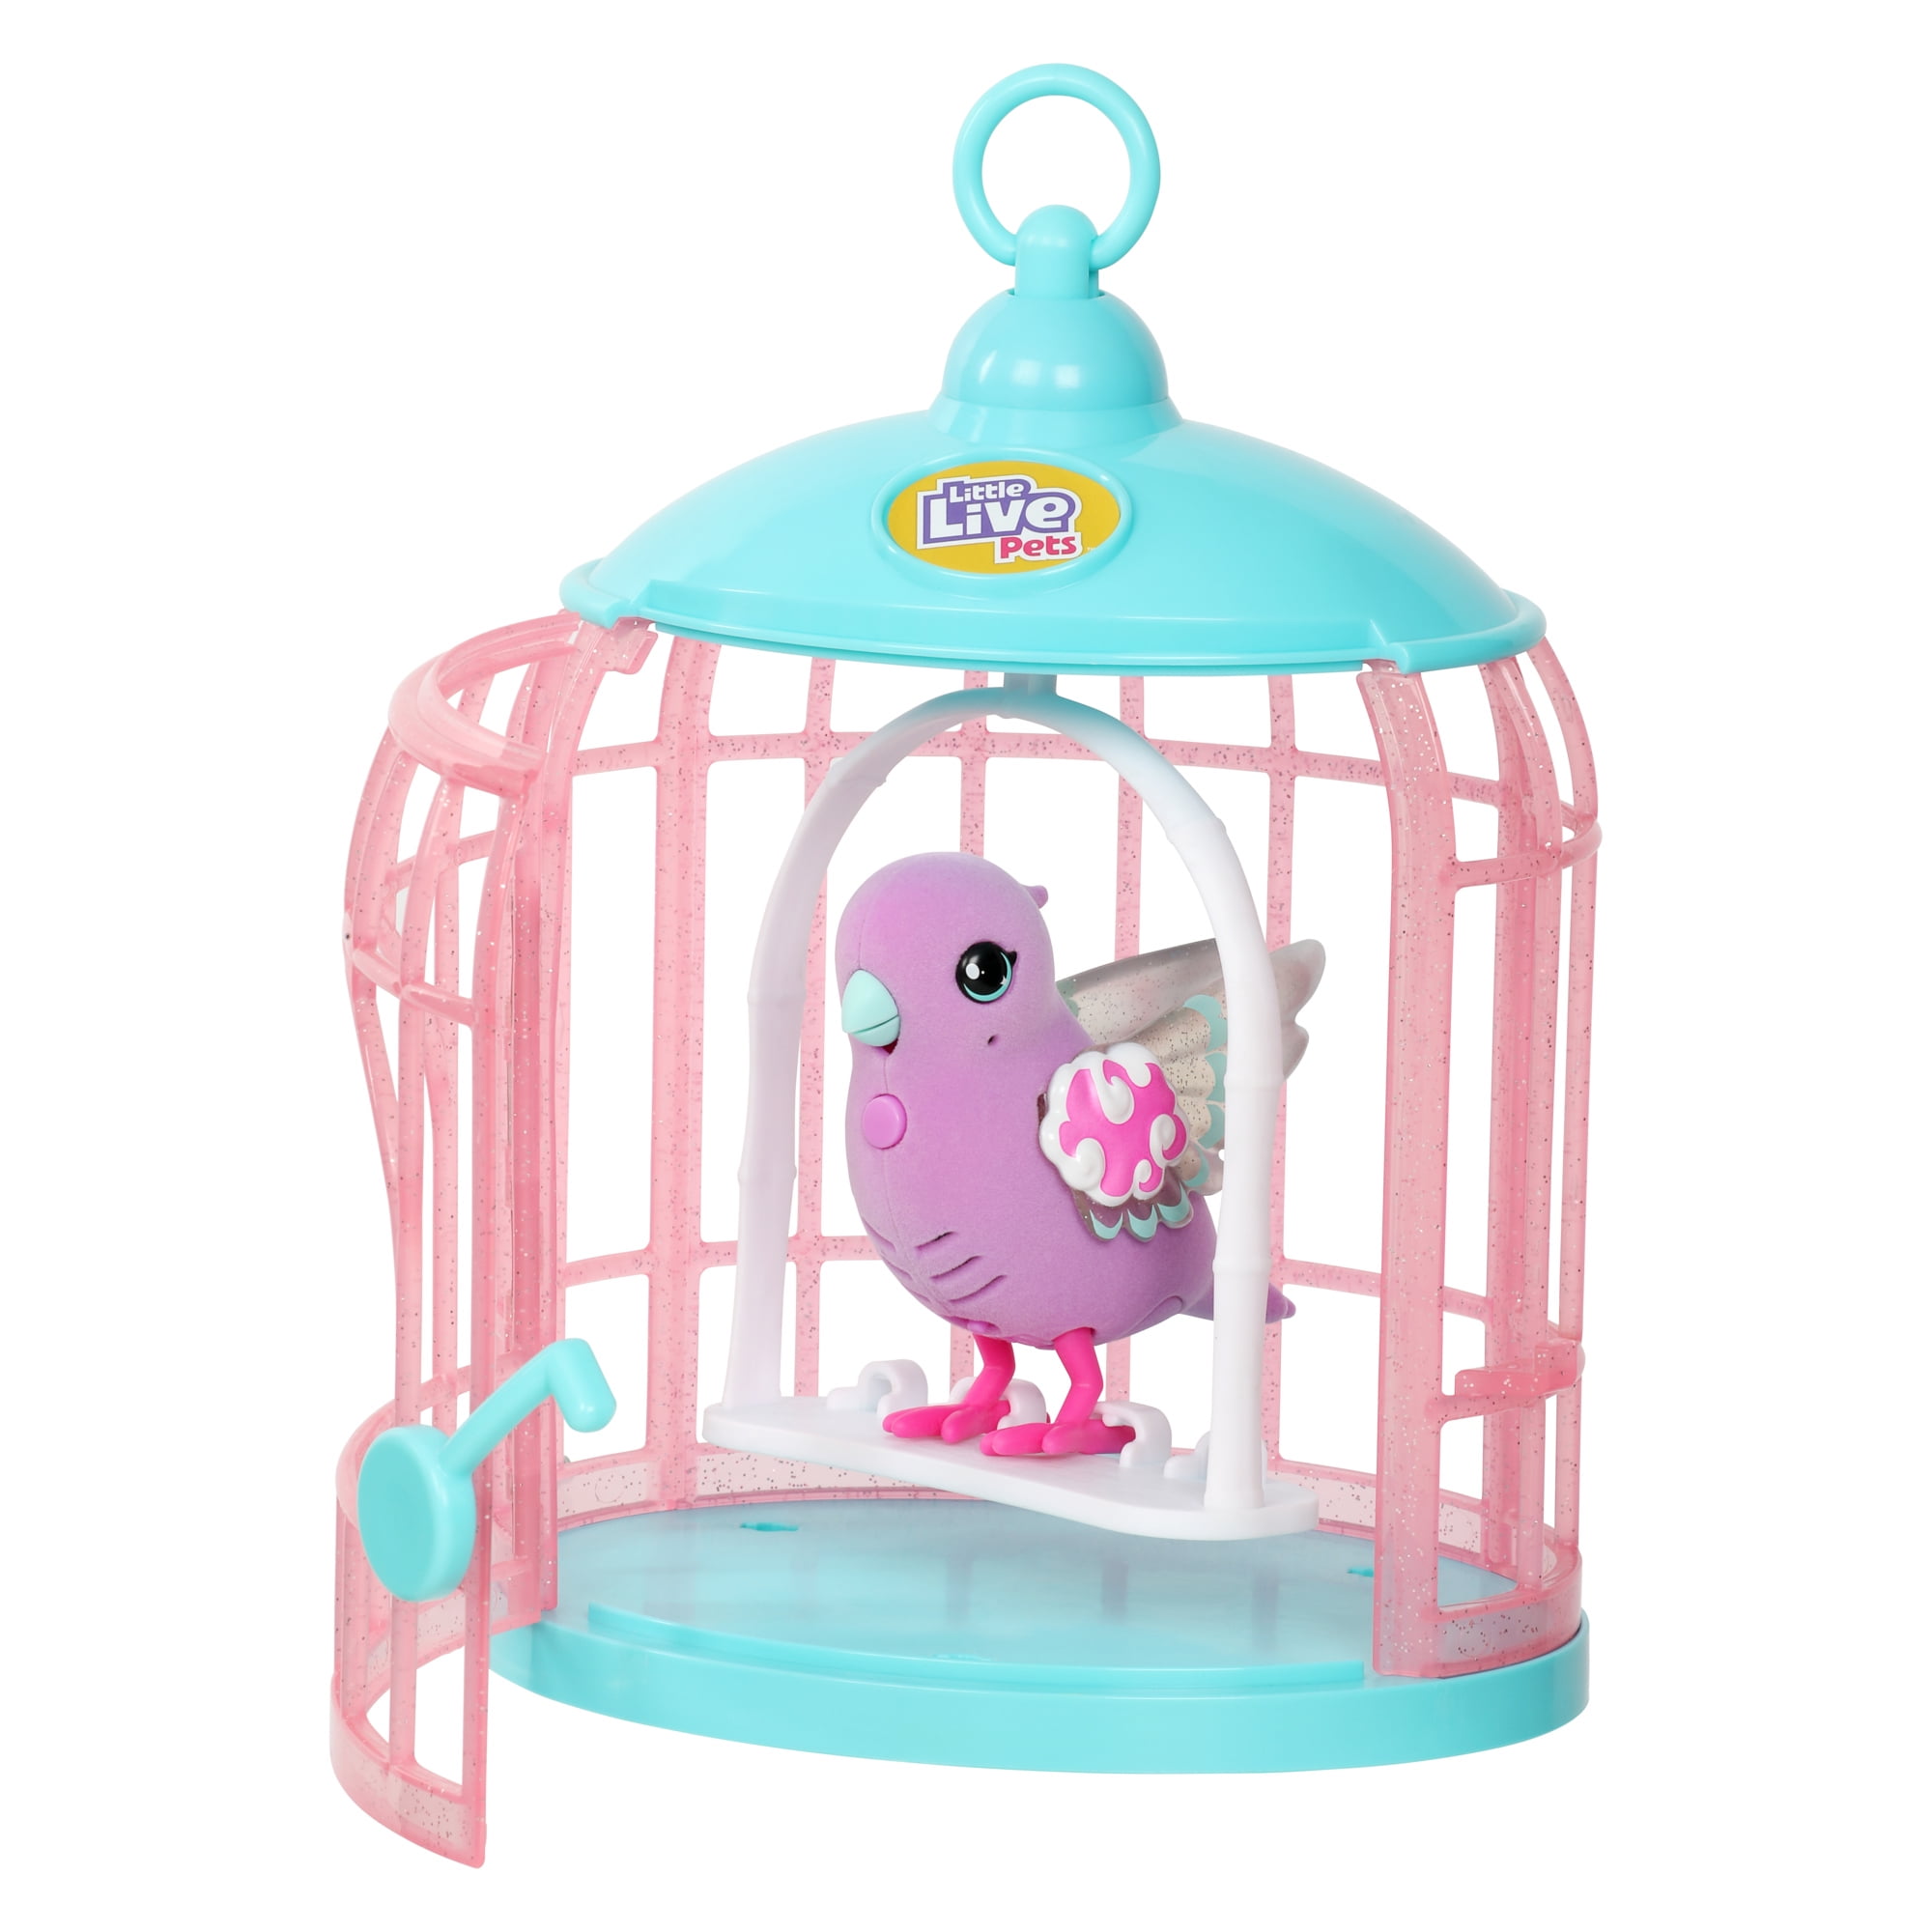 Little live pets-Bird chatterbox twinkles with Cage Blue Color 8 series 